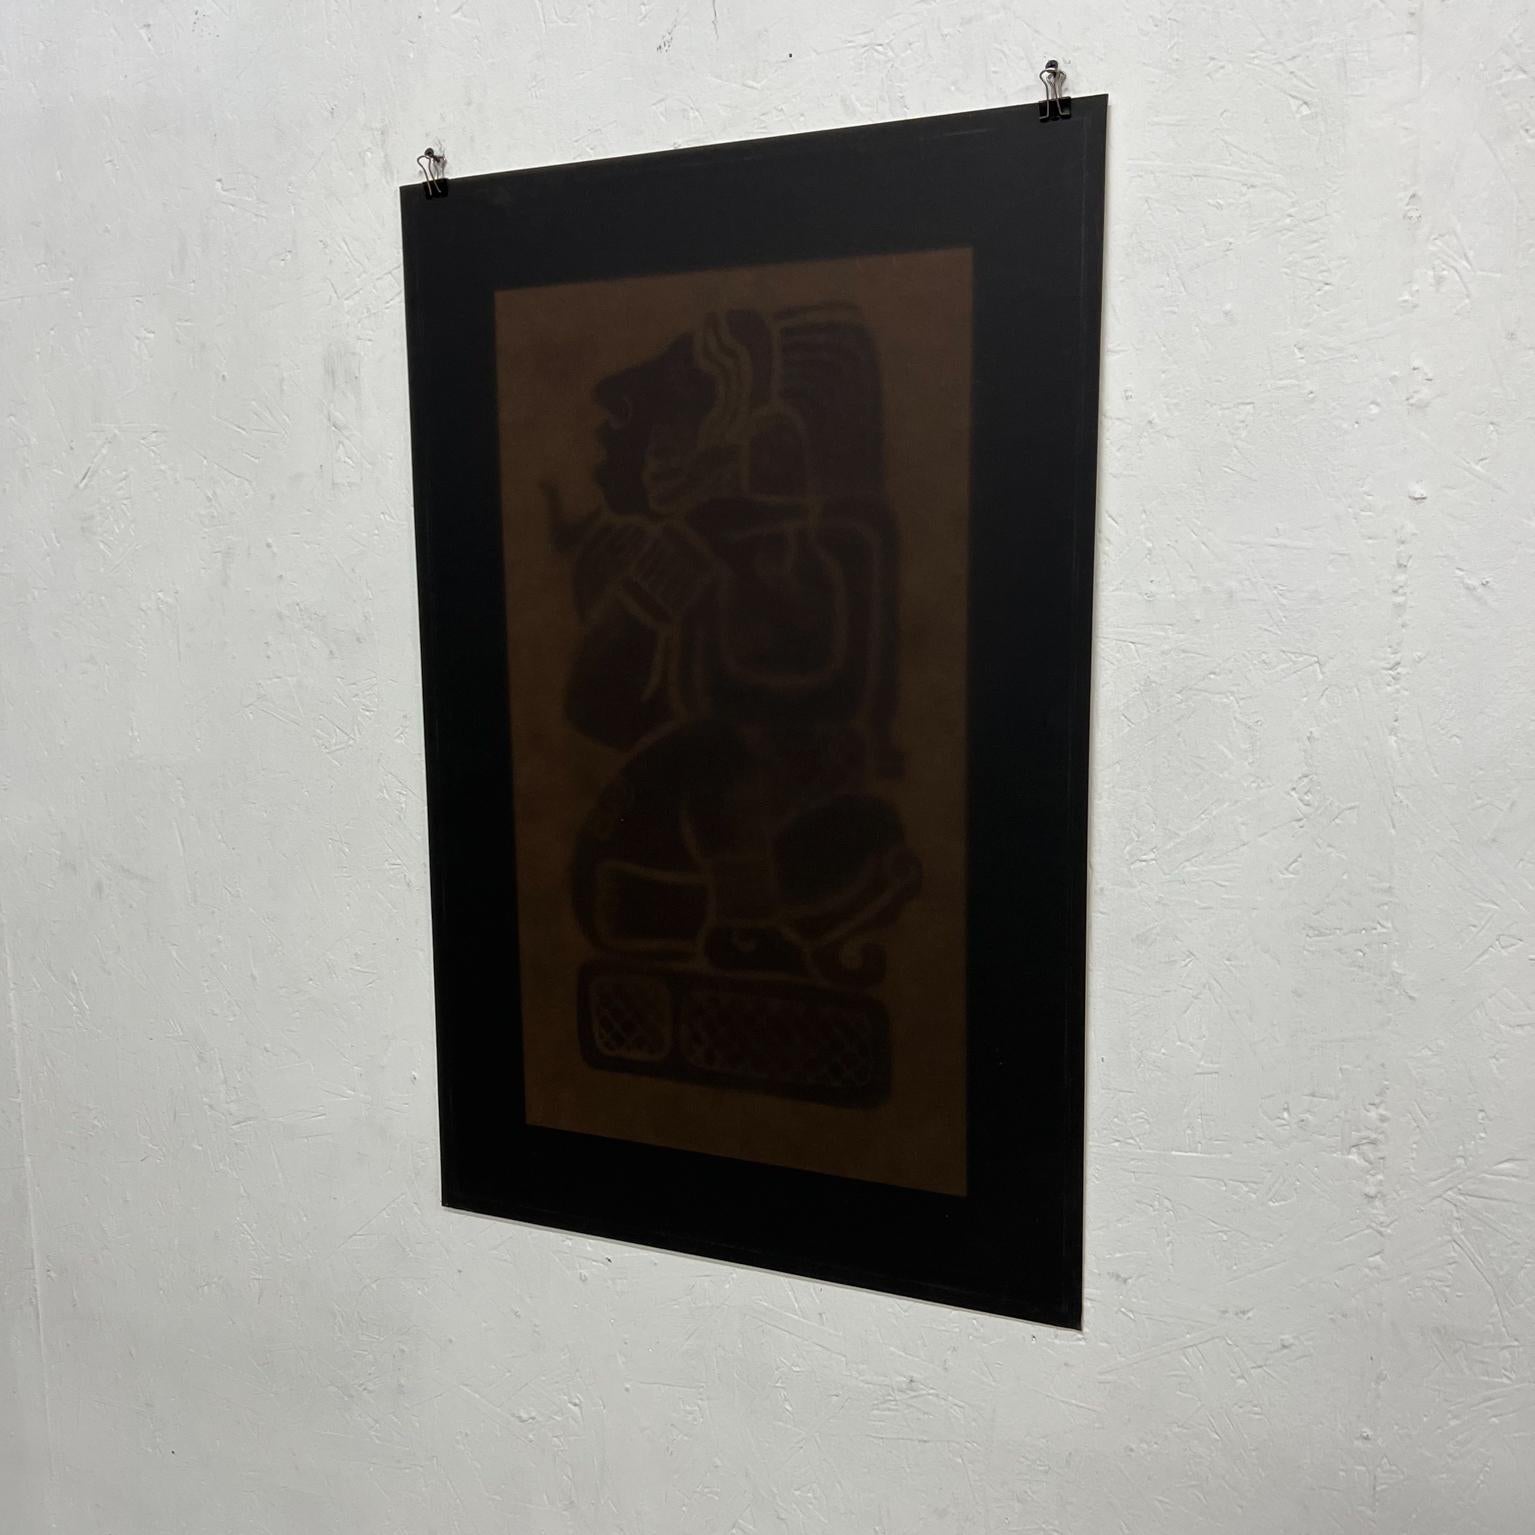 Intricate Mayan Revival Art Vintage Black Photograph Poster In Good Condition For Sale In Chula Vista, CA